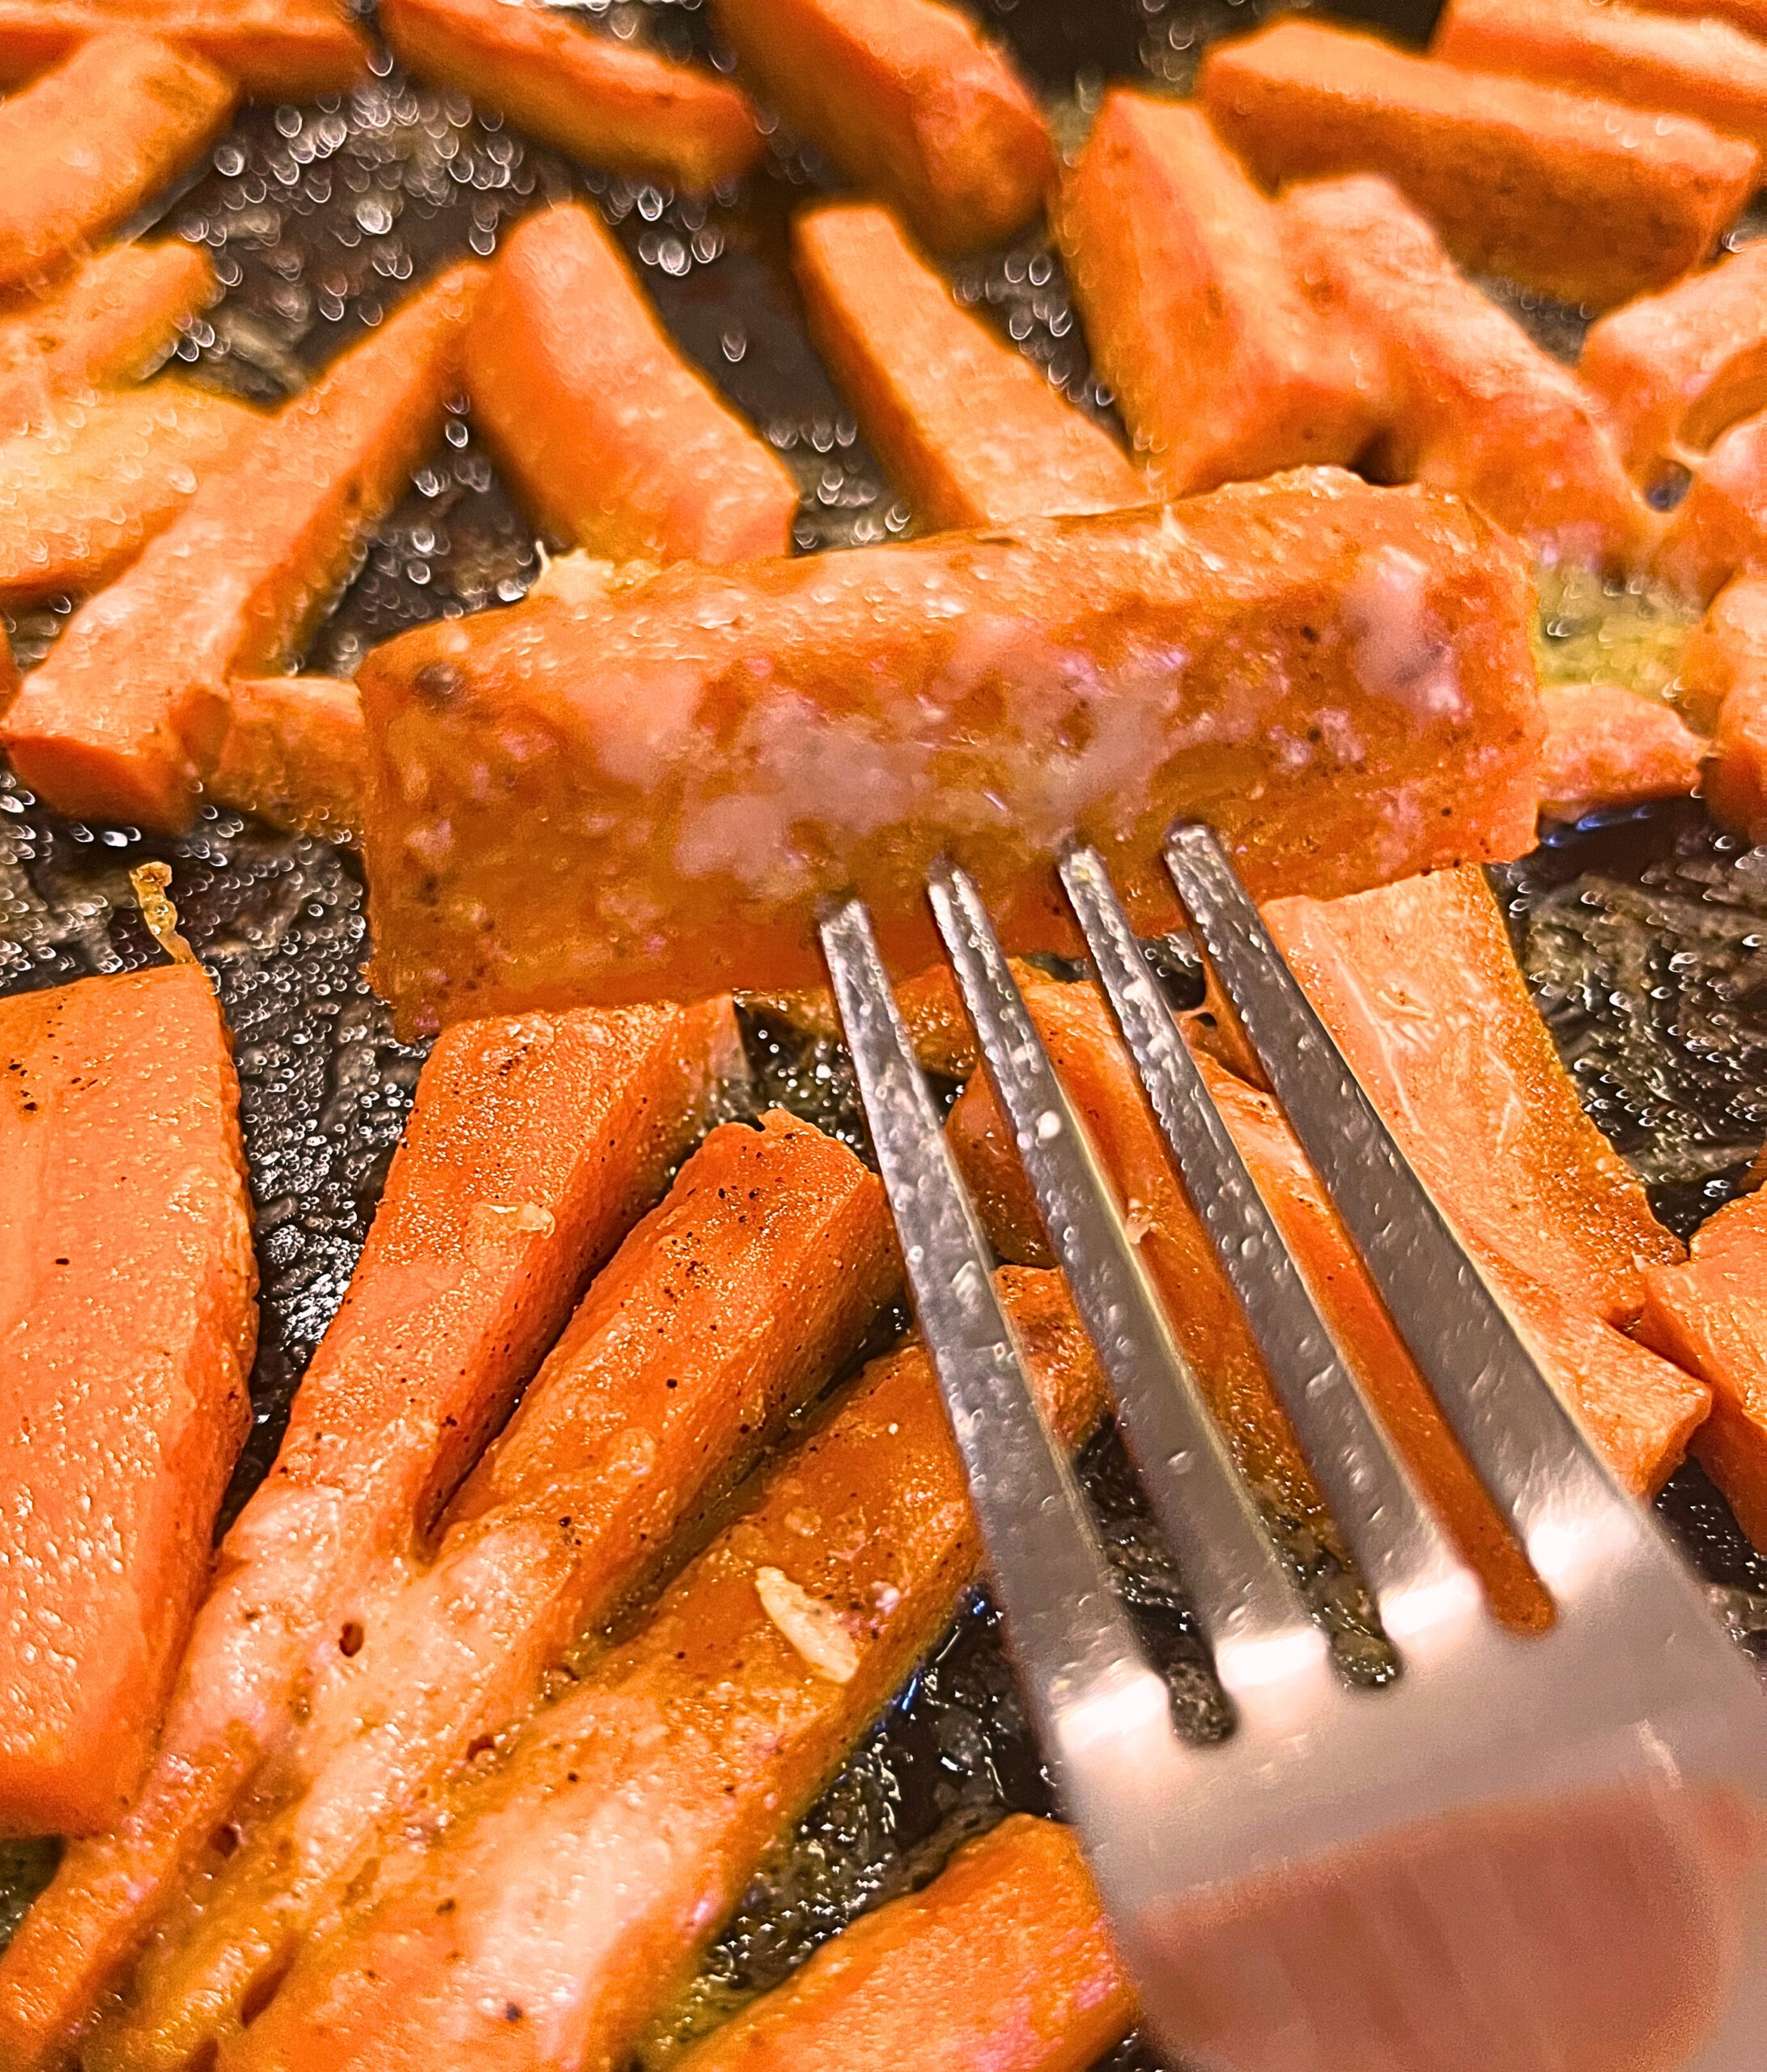 Marg’s Simple Oven Sautéed Carrots with Cheese